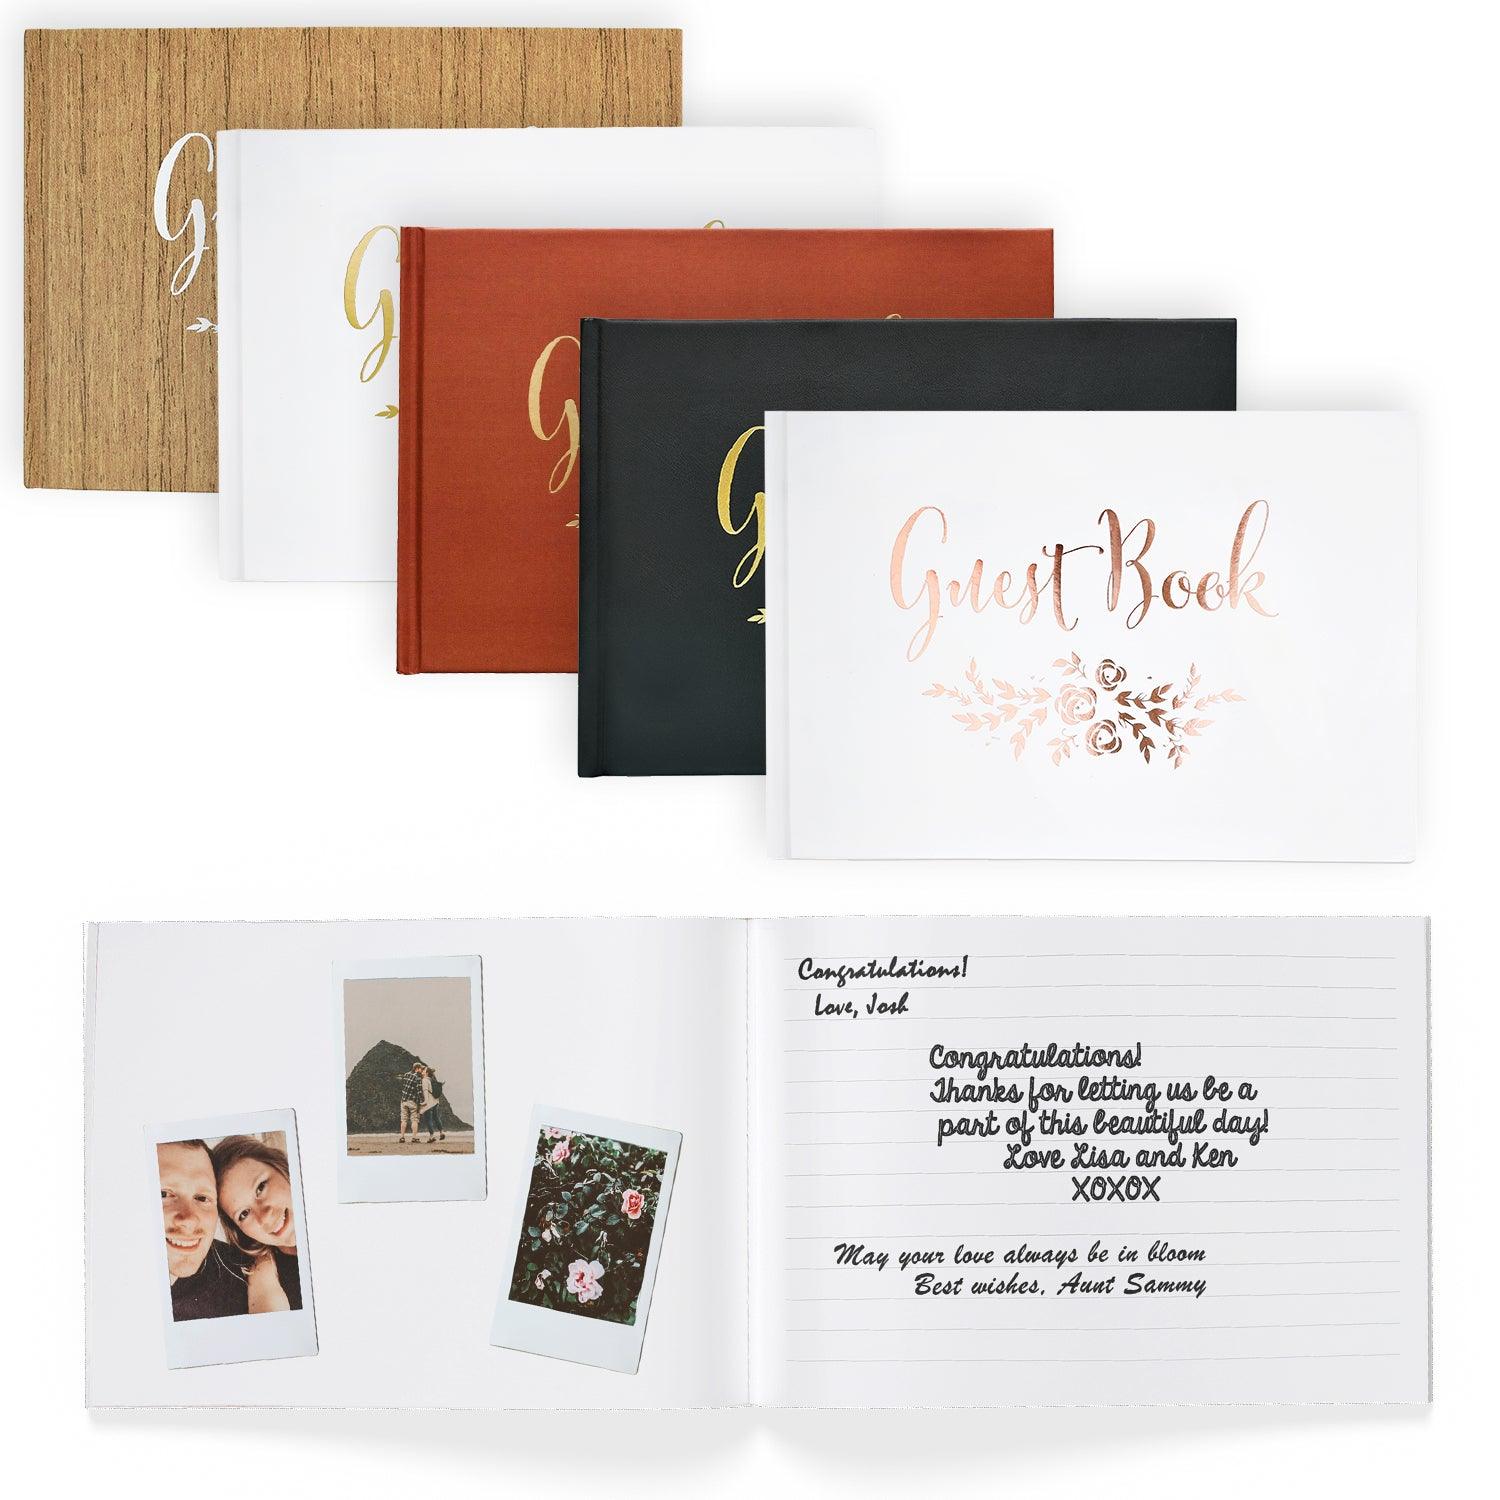 MOXOXKY Polaroid Guest Book for Wedding 9x7” – 100 Pages/50 Sheets Guest Book Blank Pages with Foil Gilded Edges, Wedding Books Keepsake with Gold